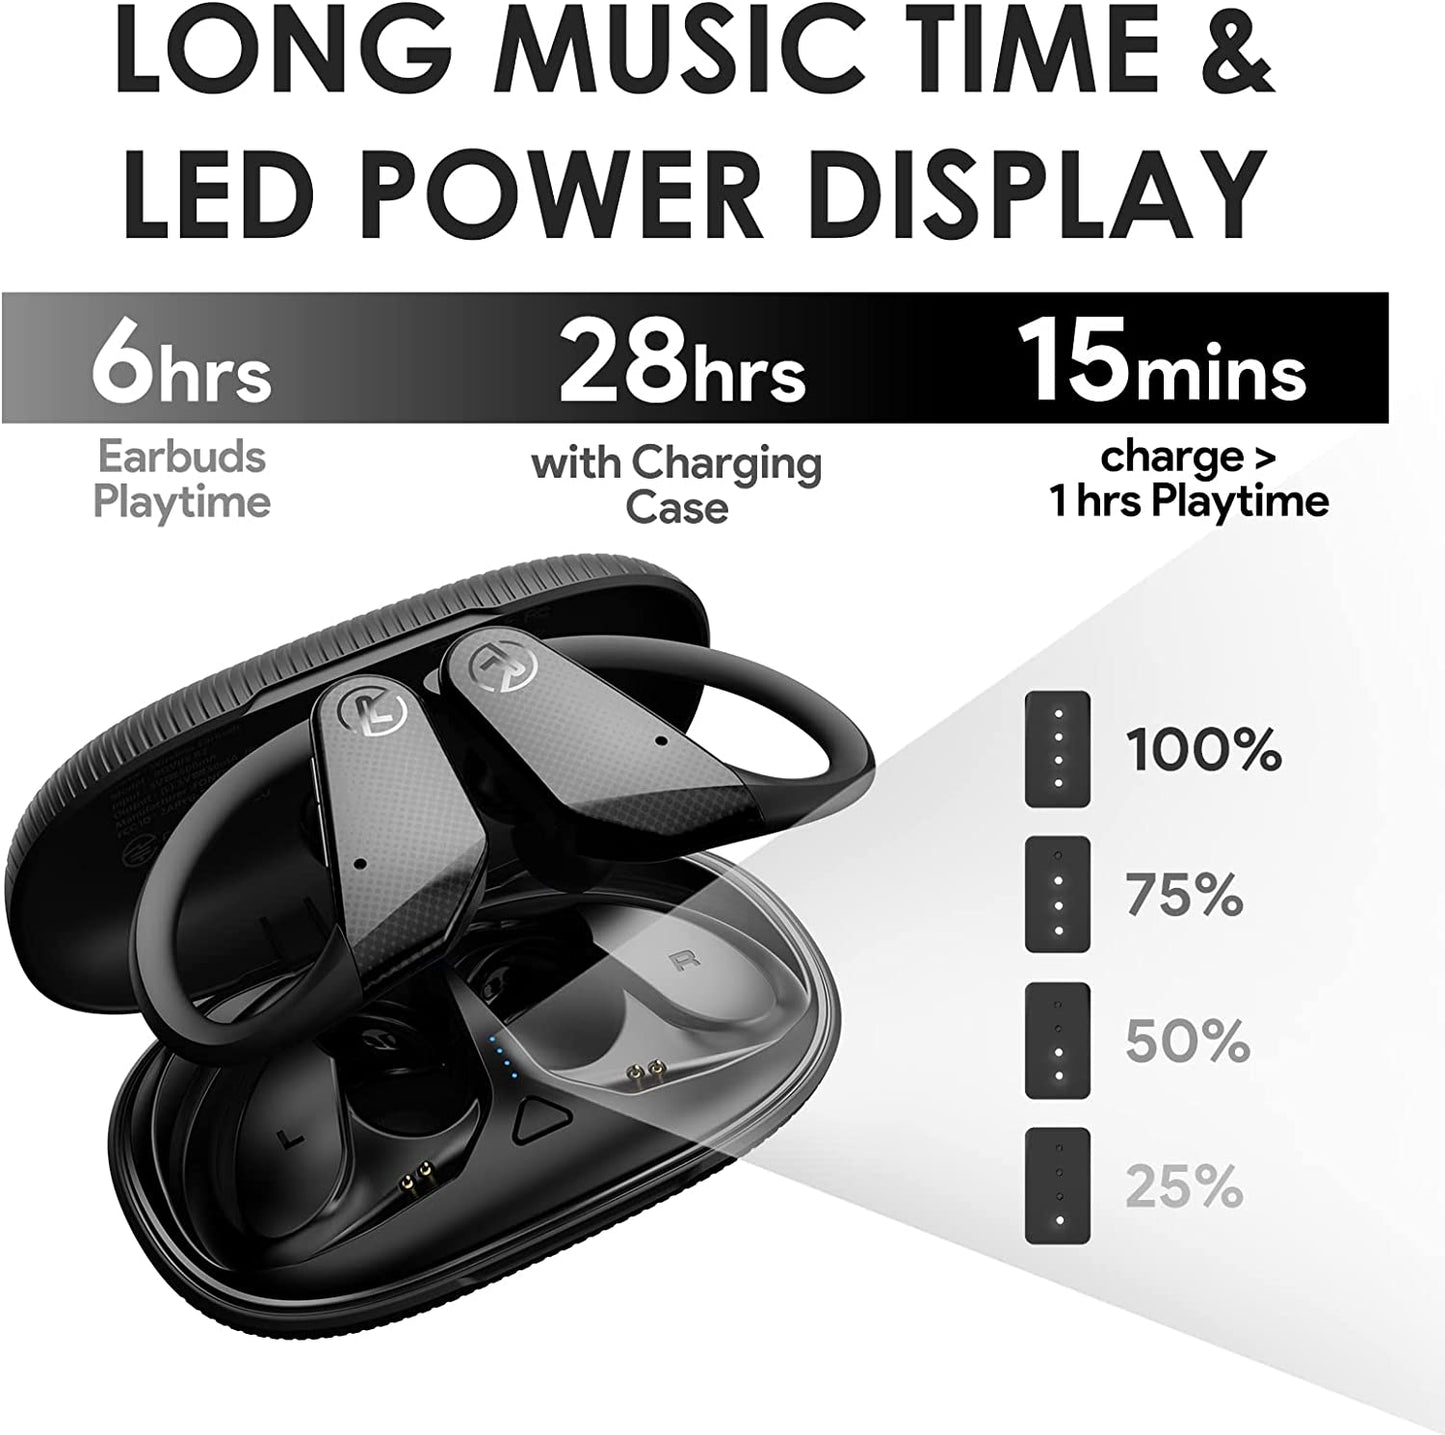 Wireless Earbuds Bluetooth 5.3 Earphones IPX7 Sport Earbuds for Running Workout Bass Stereo Headphones with Ear Hook Microphones over Ear Earbuds for iPhone Android, Fast Pair